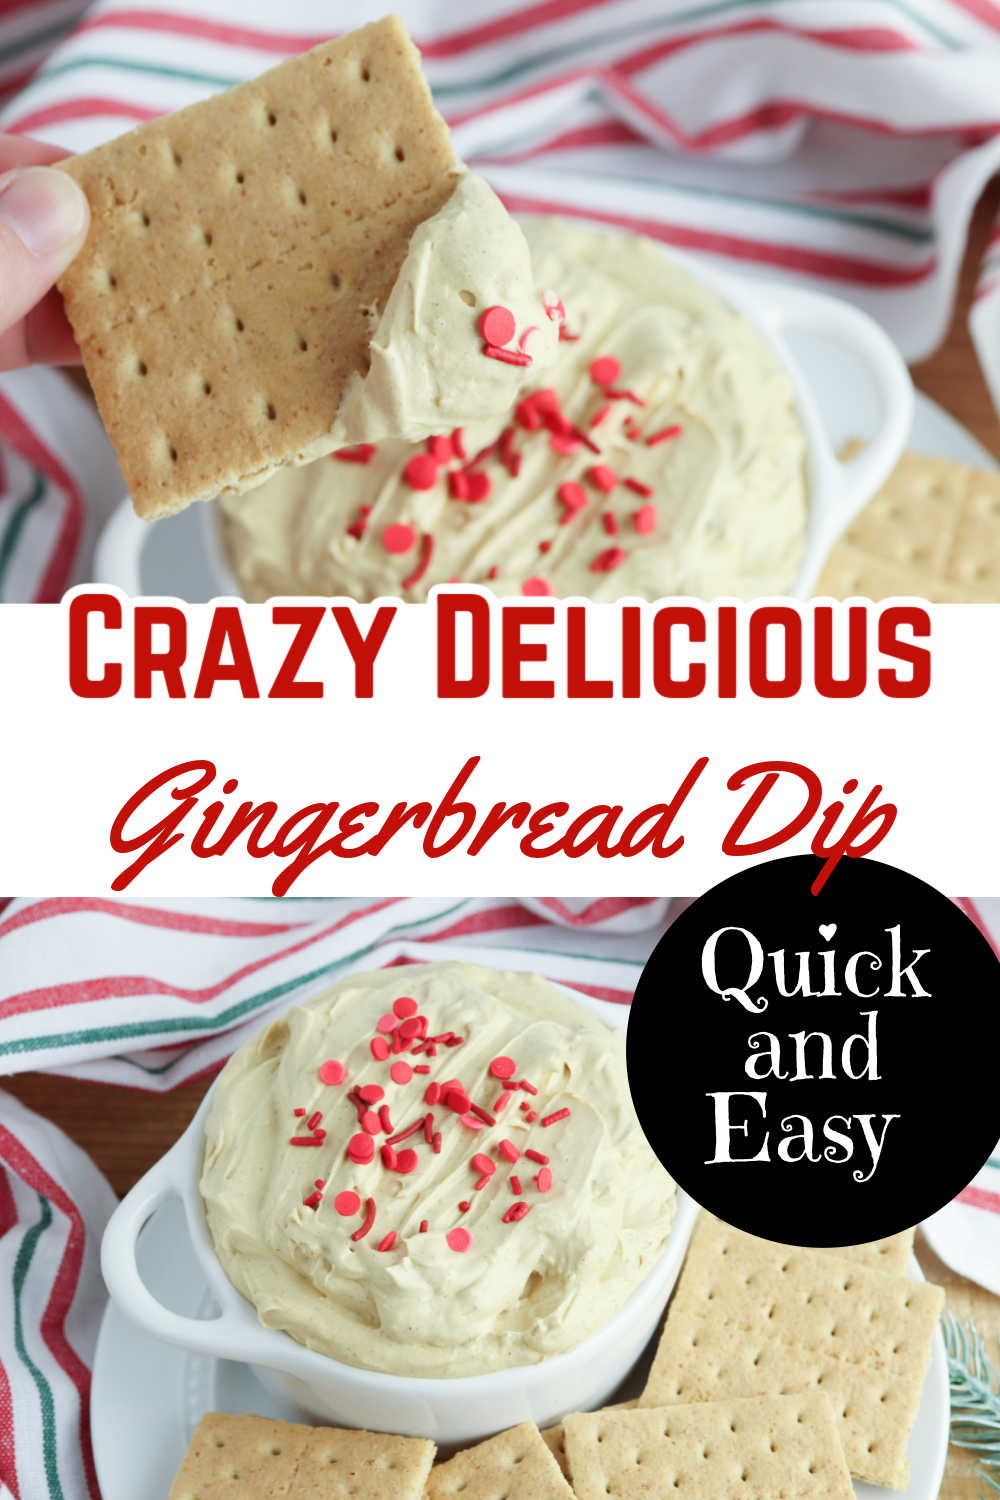 Pin image: top is a graham cracker with gingerbread dip on it, middle says "Crazy Delicious Gingerbread Dip: Quick and Easy" and bottom is a top down pic of gingerbread dip.